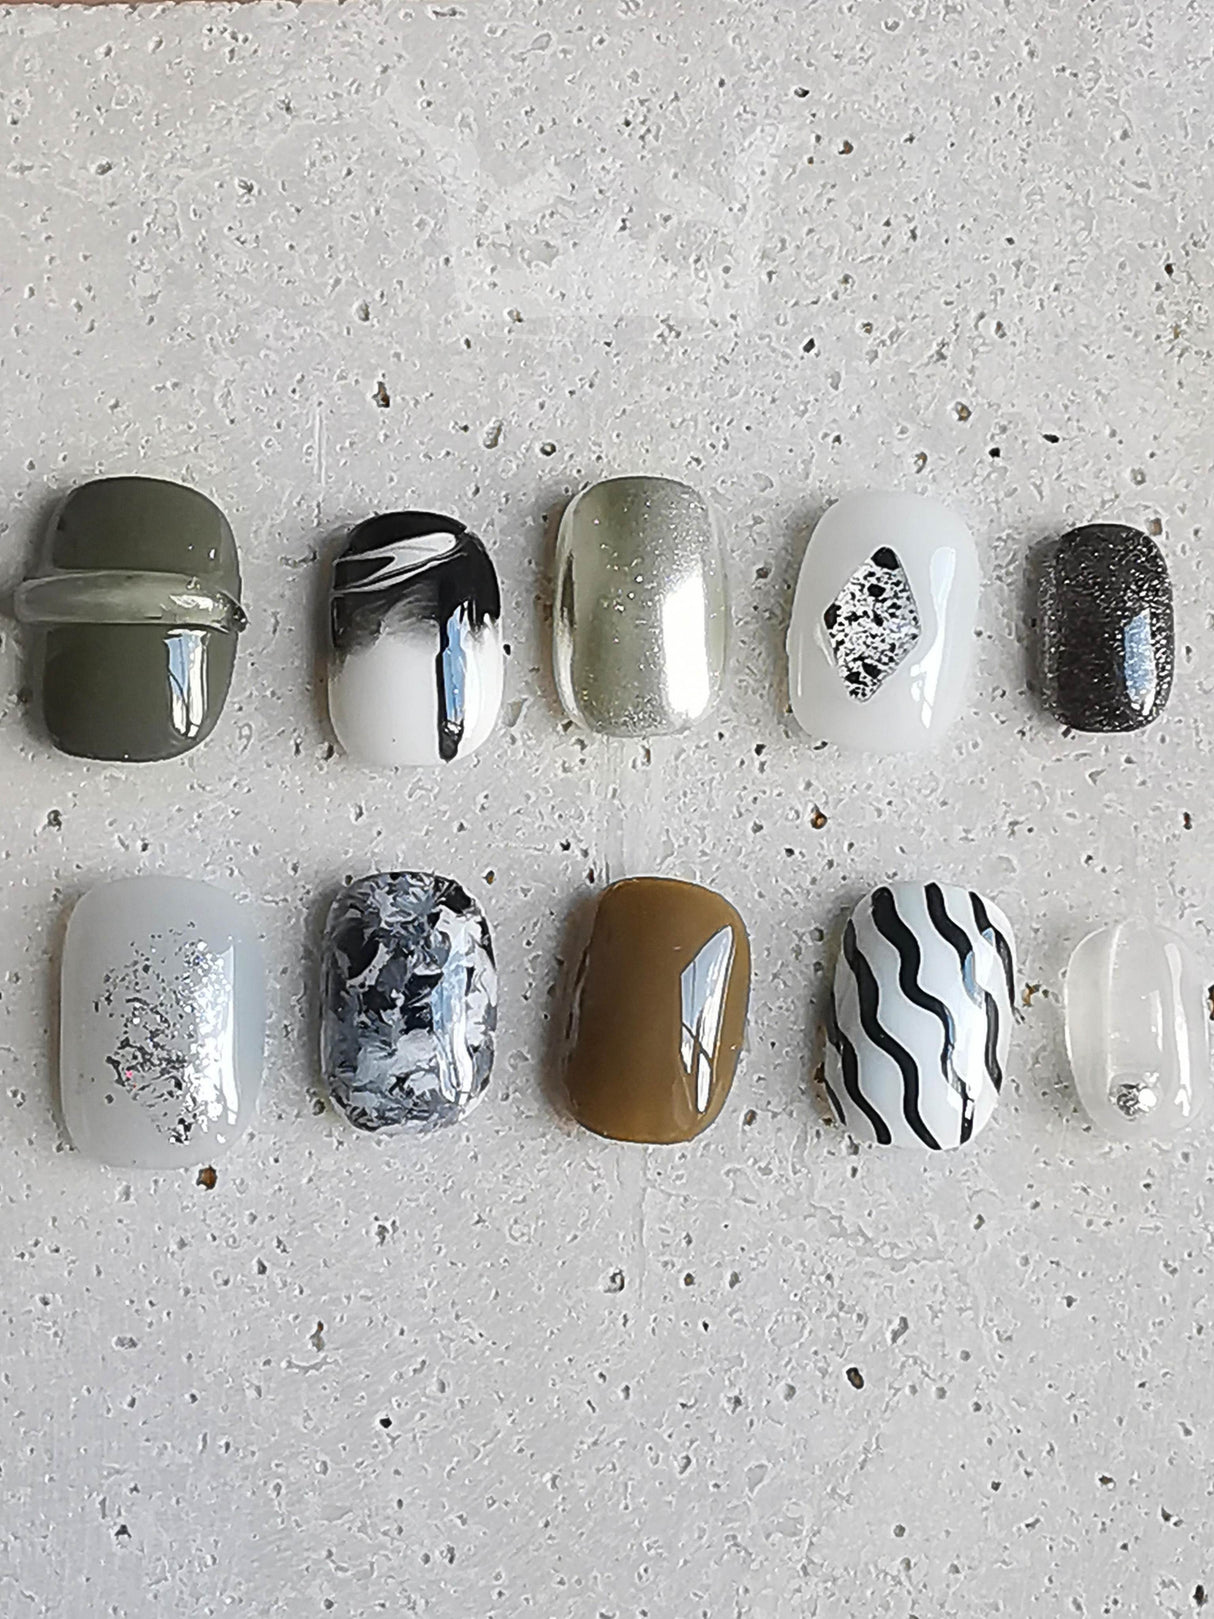 These press-on nails have glitter, stripes, marbled designs, and embellishments. The overall aesthetic is modern and stylish, with a focus on dark and neutral tones and a touch of glamour.